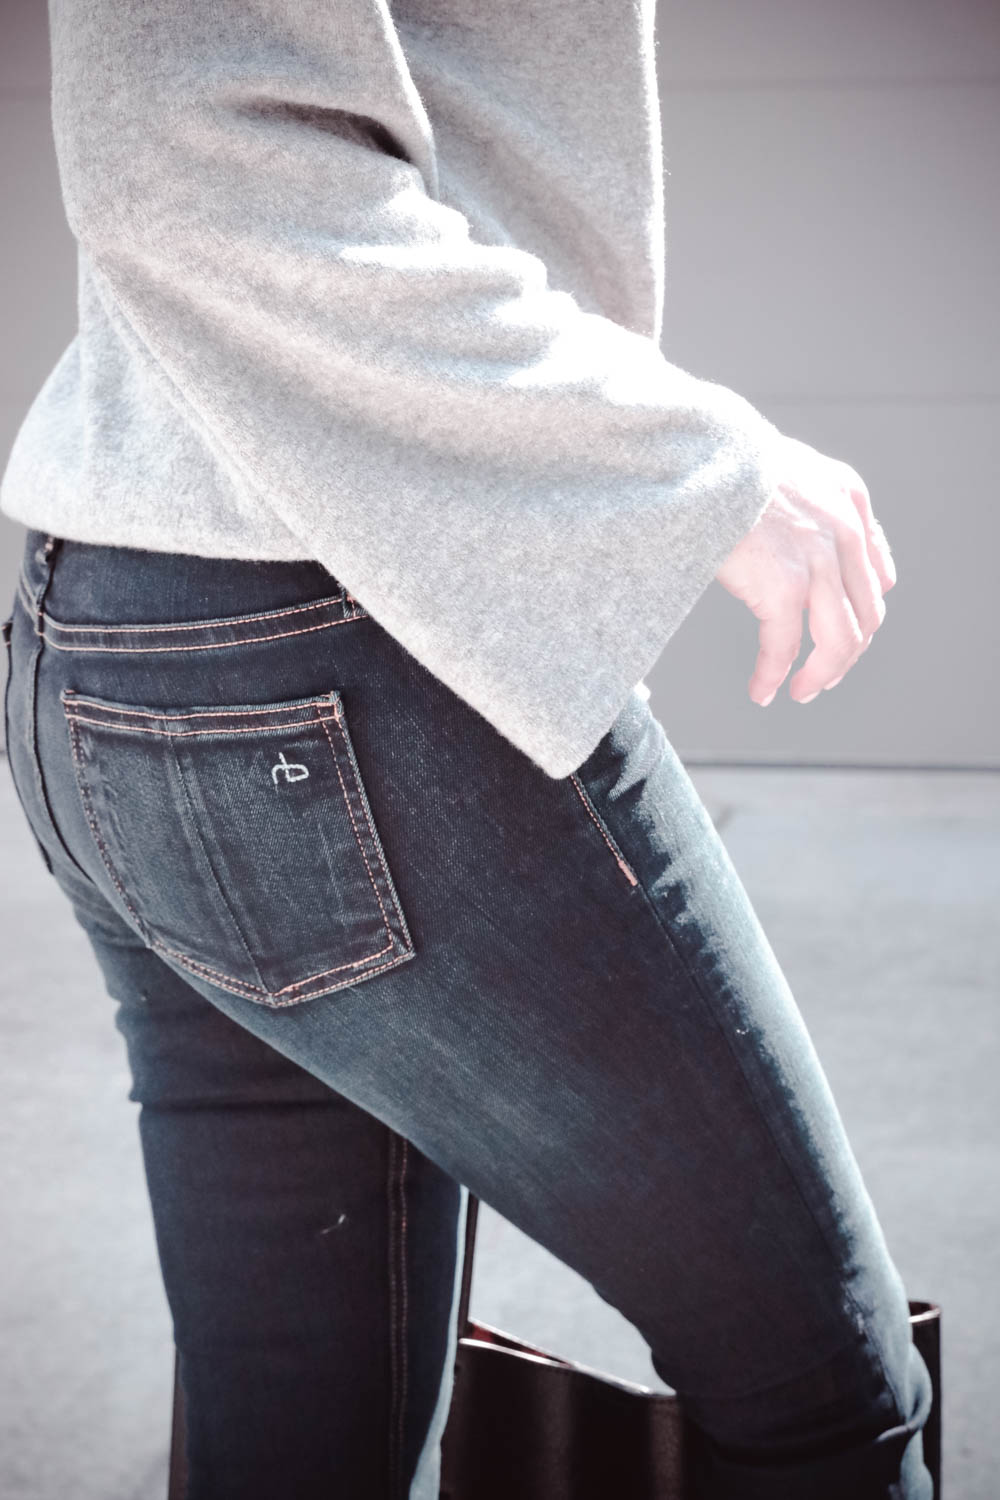 Dark wash skinny jeans called Bedford by Rag & Bone worn by Erin Busbee, BusbeeStyle.com, San Antonio, Texas lifestyle and fashion blogger giving wardrobe tips for women over 40